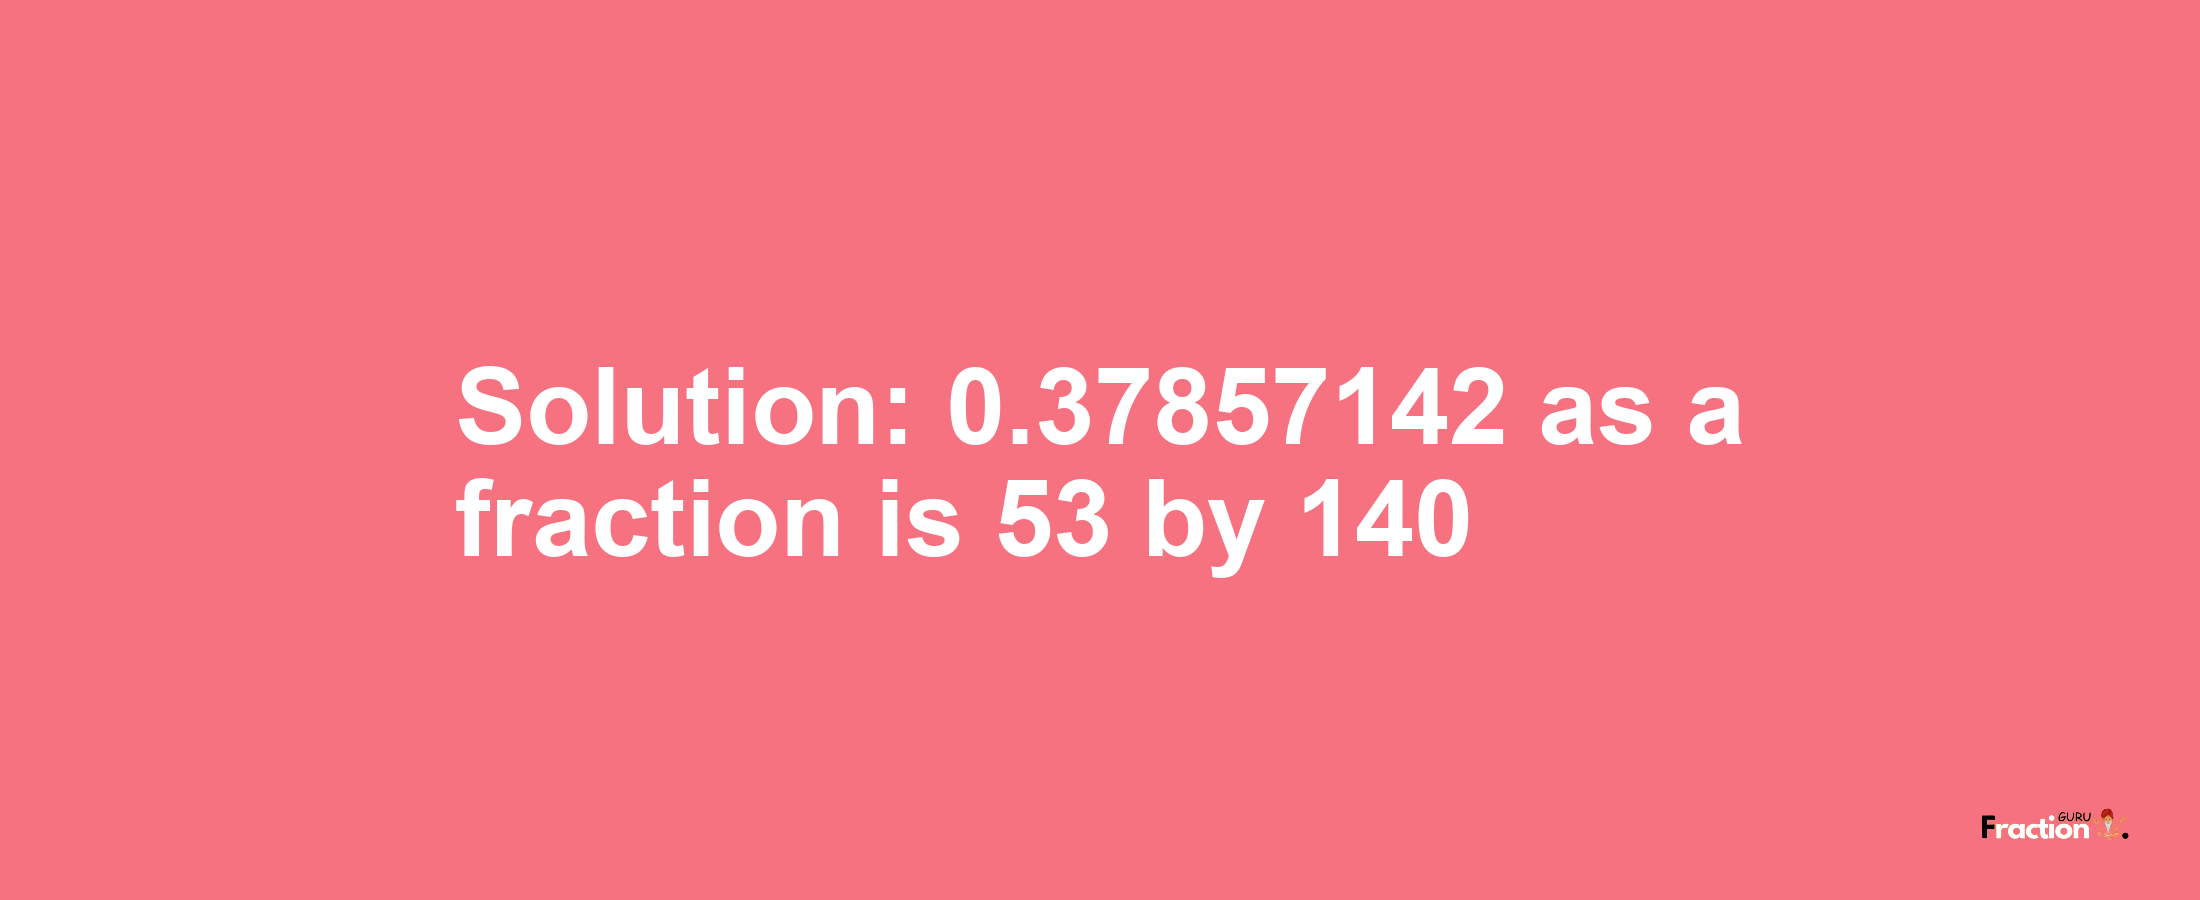 Solution:0.37857142 as a fraction is 53/140